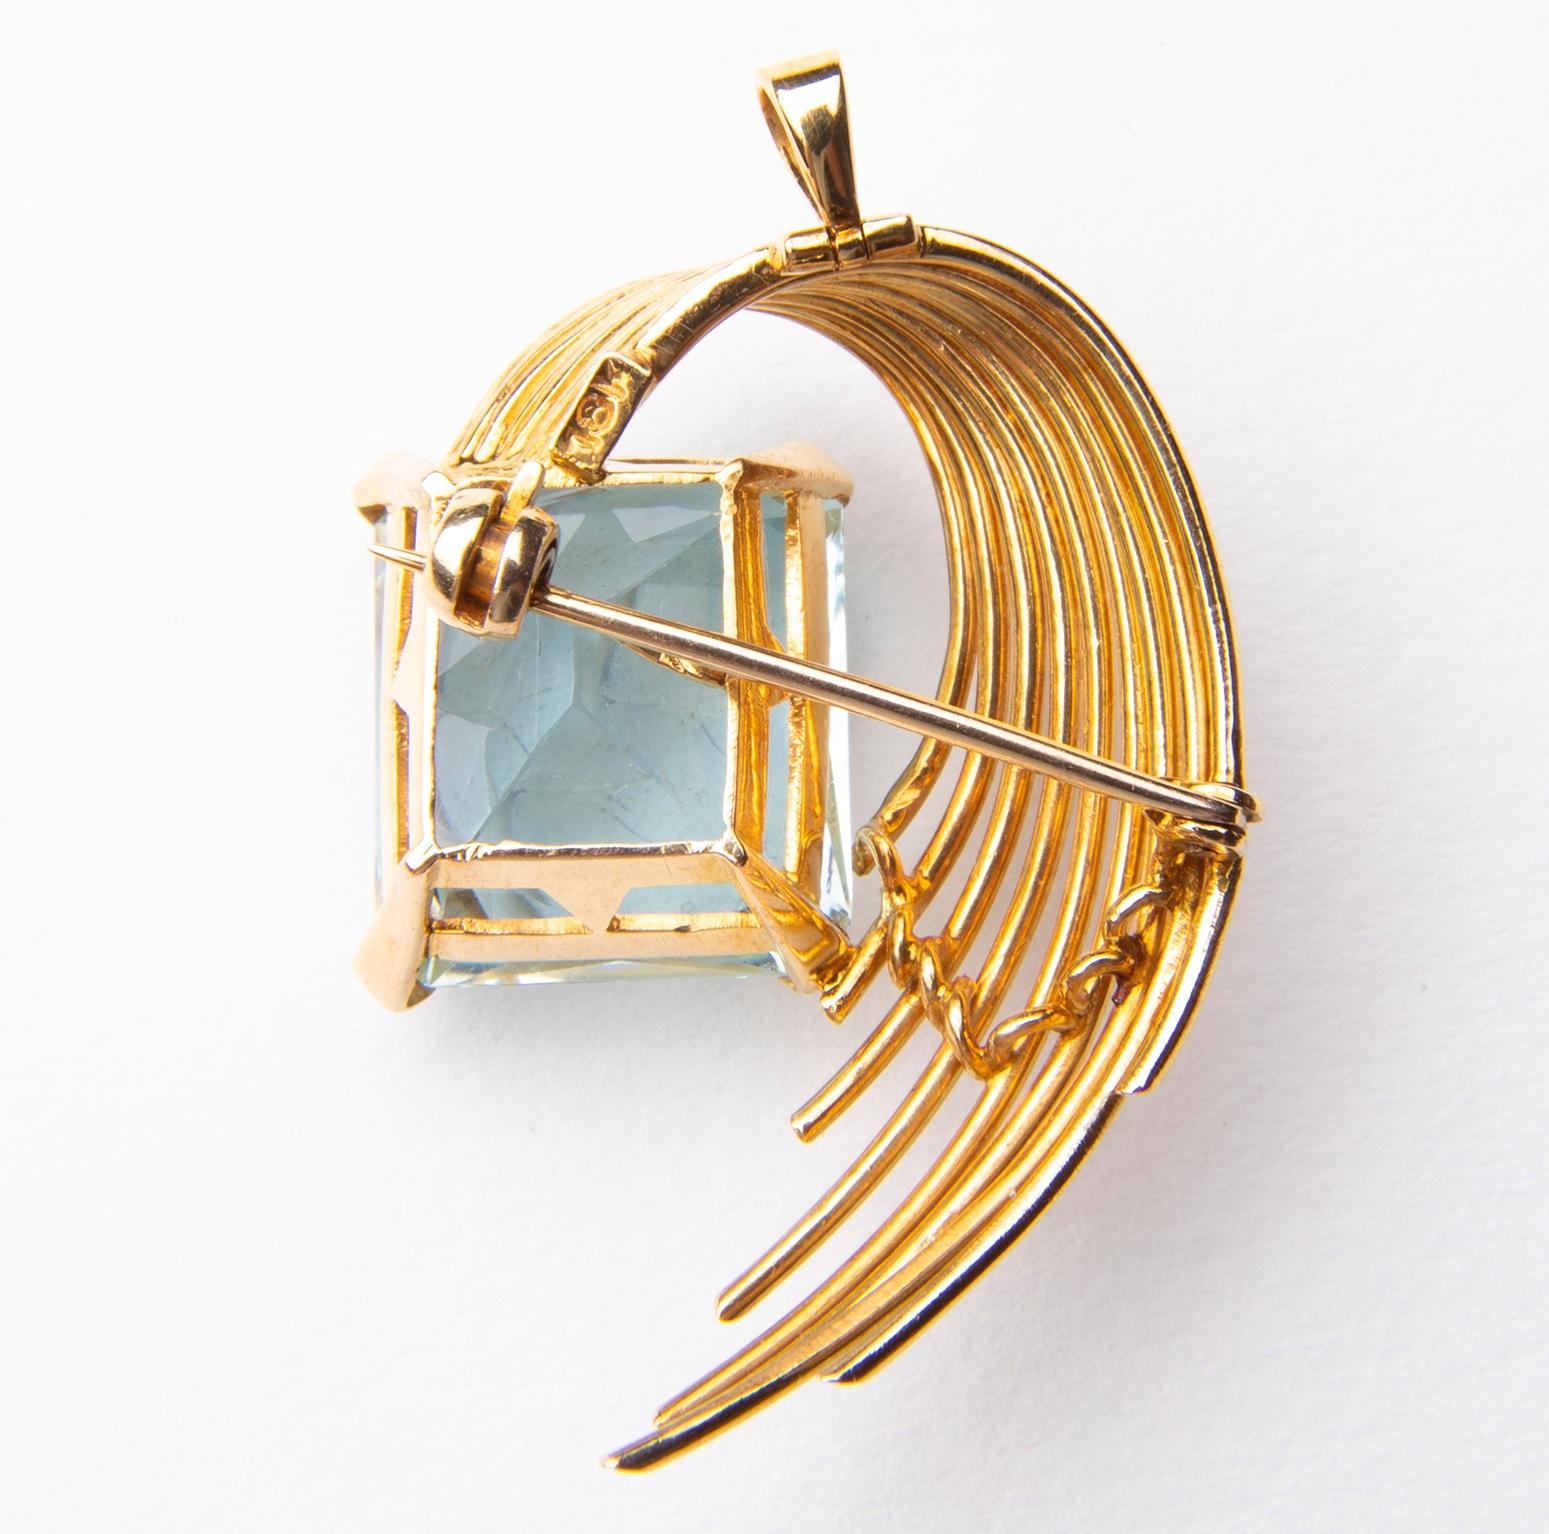 Stunning Aquamarine 18 Karat Gold Pendant or Brooch In Good Condition For Sale In Dorset, GB